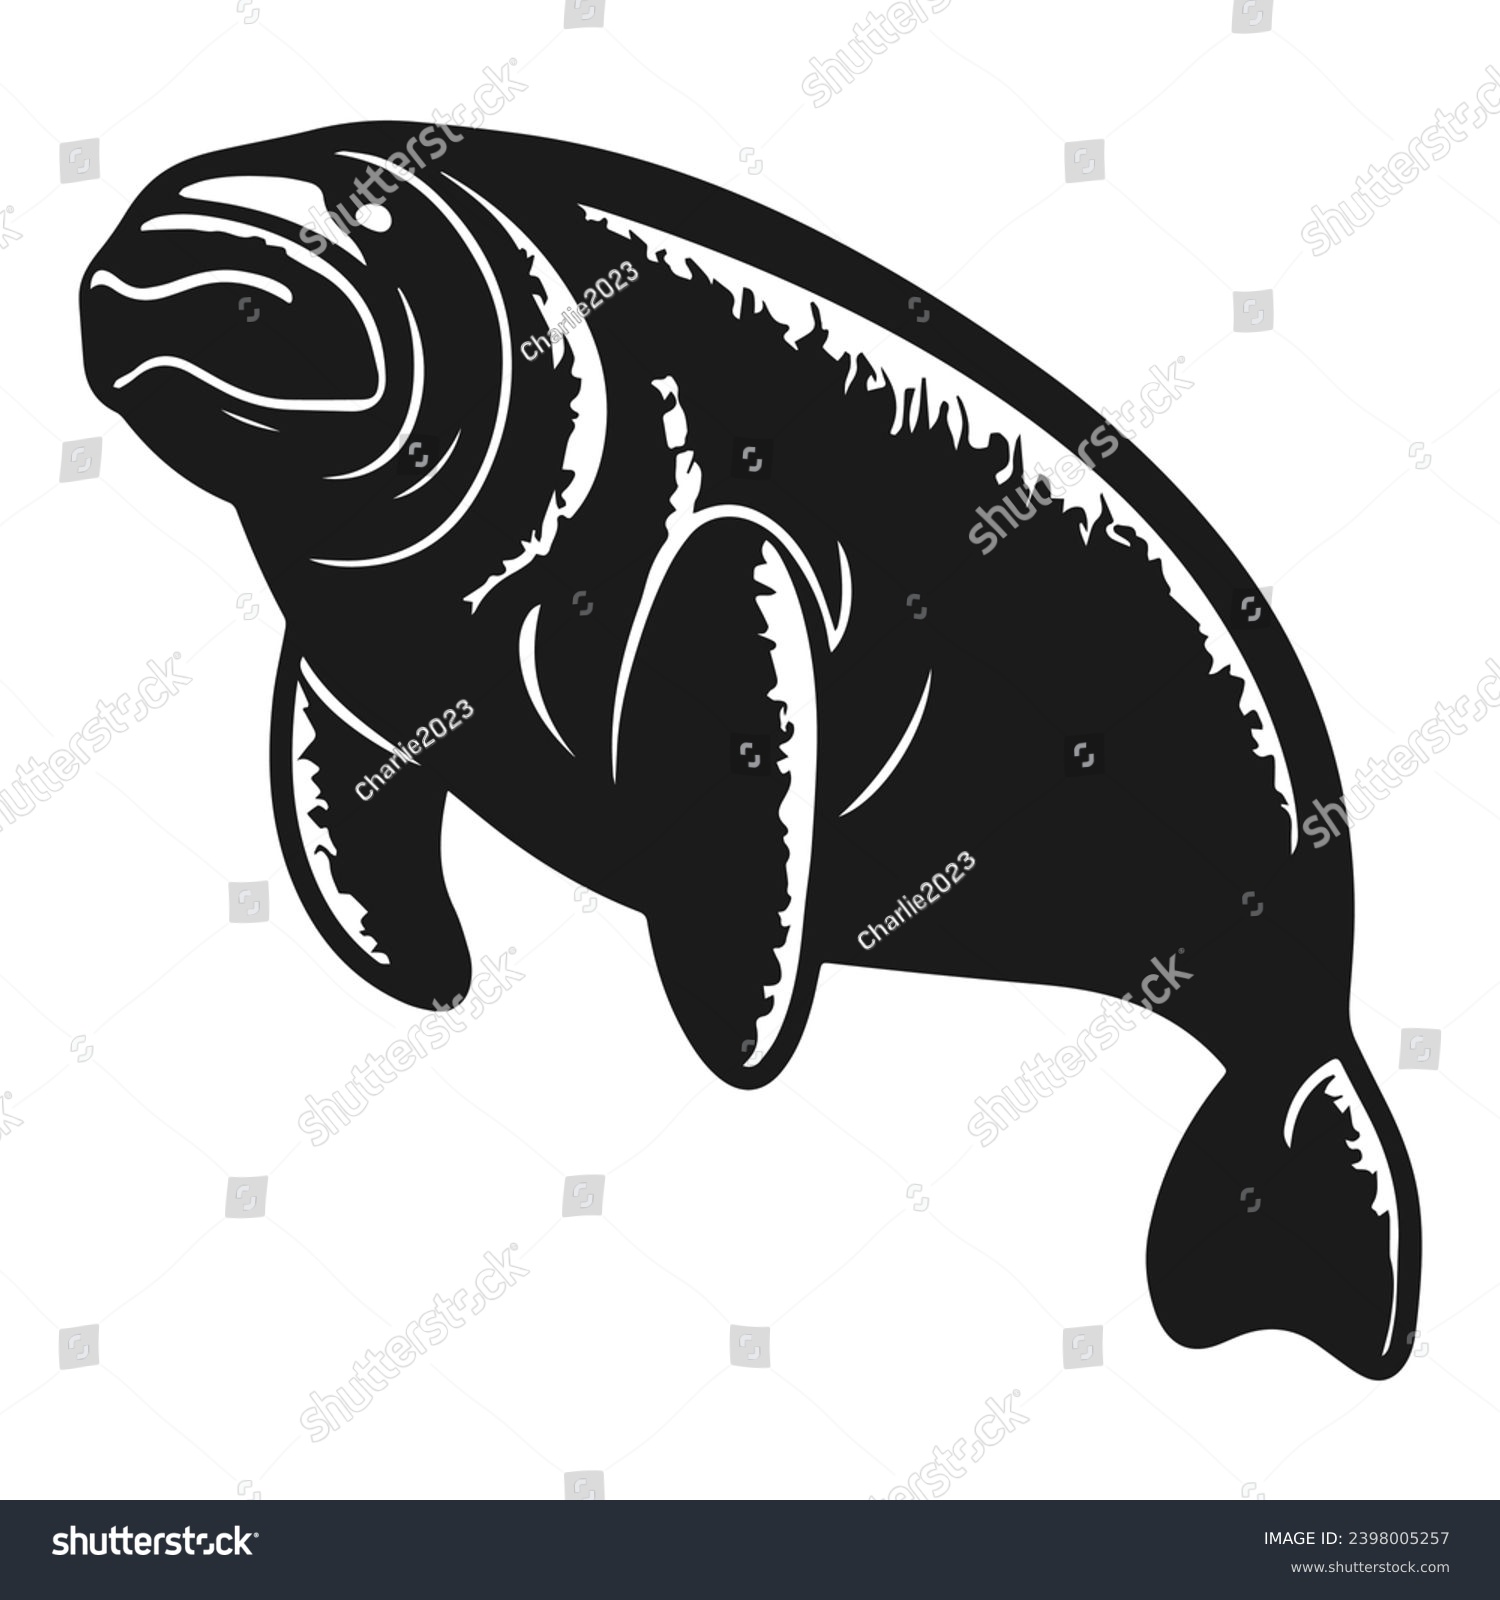 SVG of Manatee silhouettes and icons. Black flat color simple elegant white background Manatee animal vector and illustration. svg